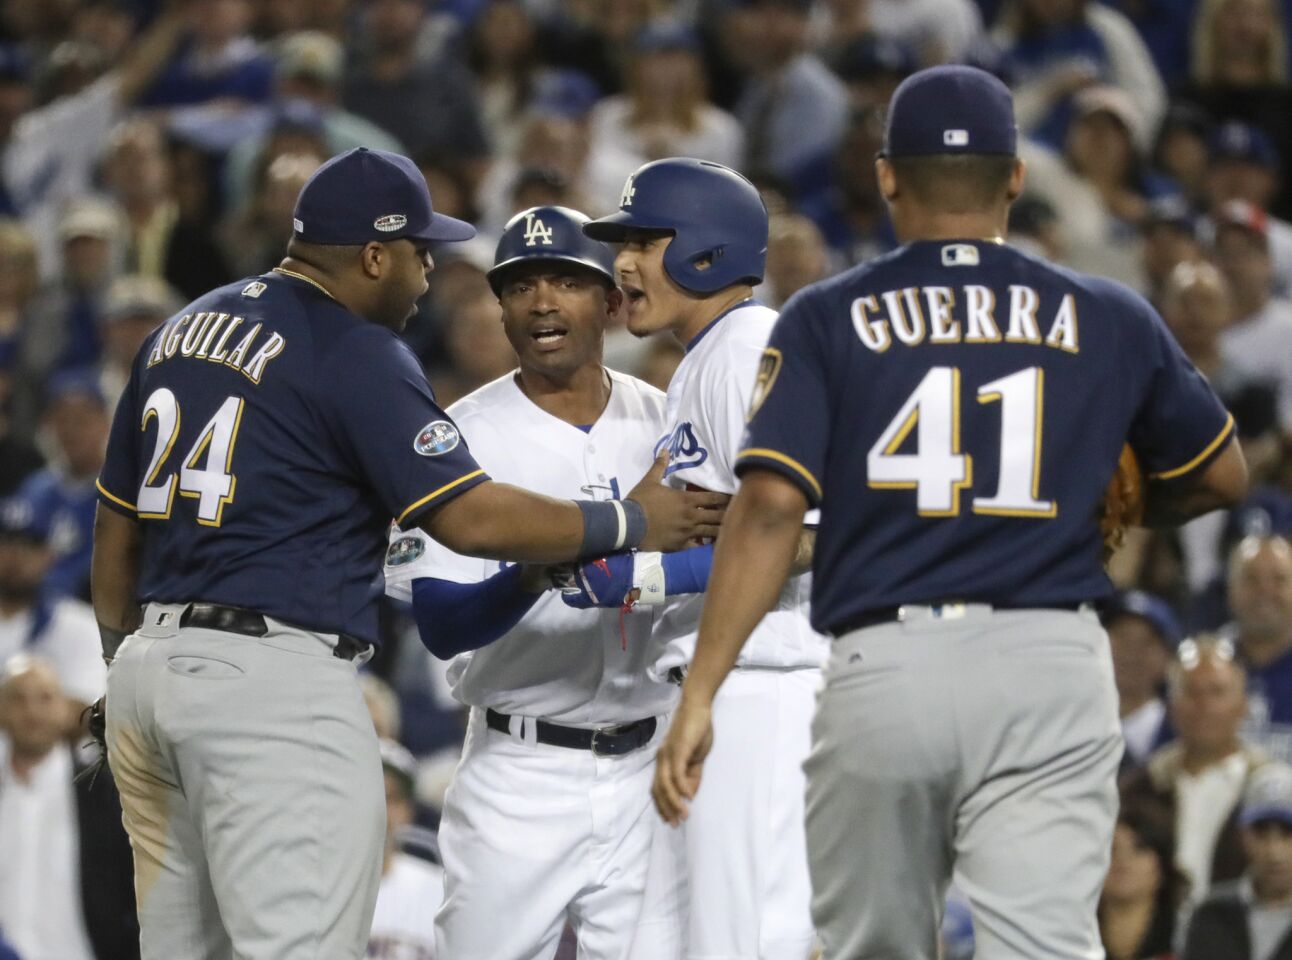 Manny Machado and Brewers first baseman Jesus Aguilar confront each other after a 10th inning groundout.